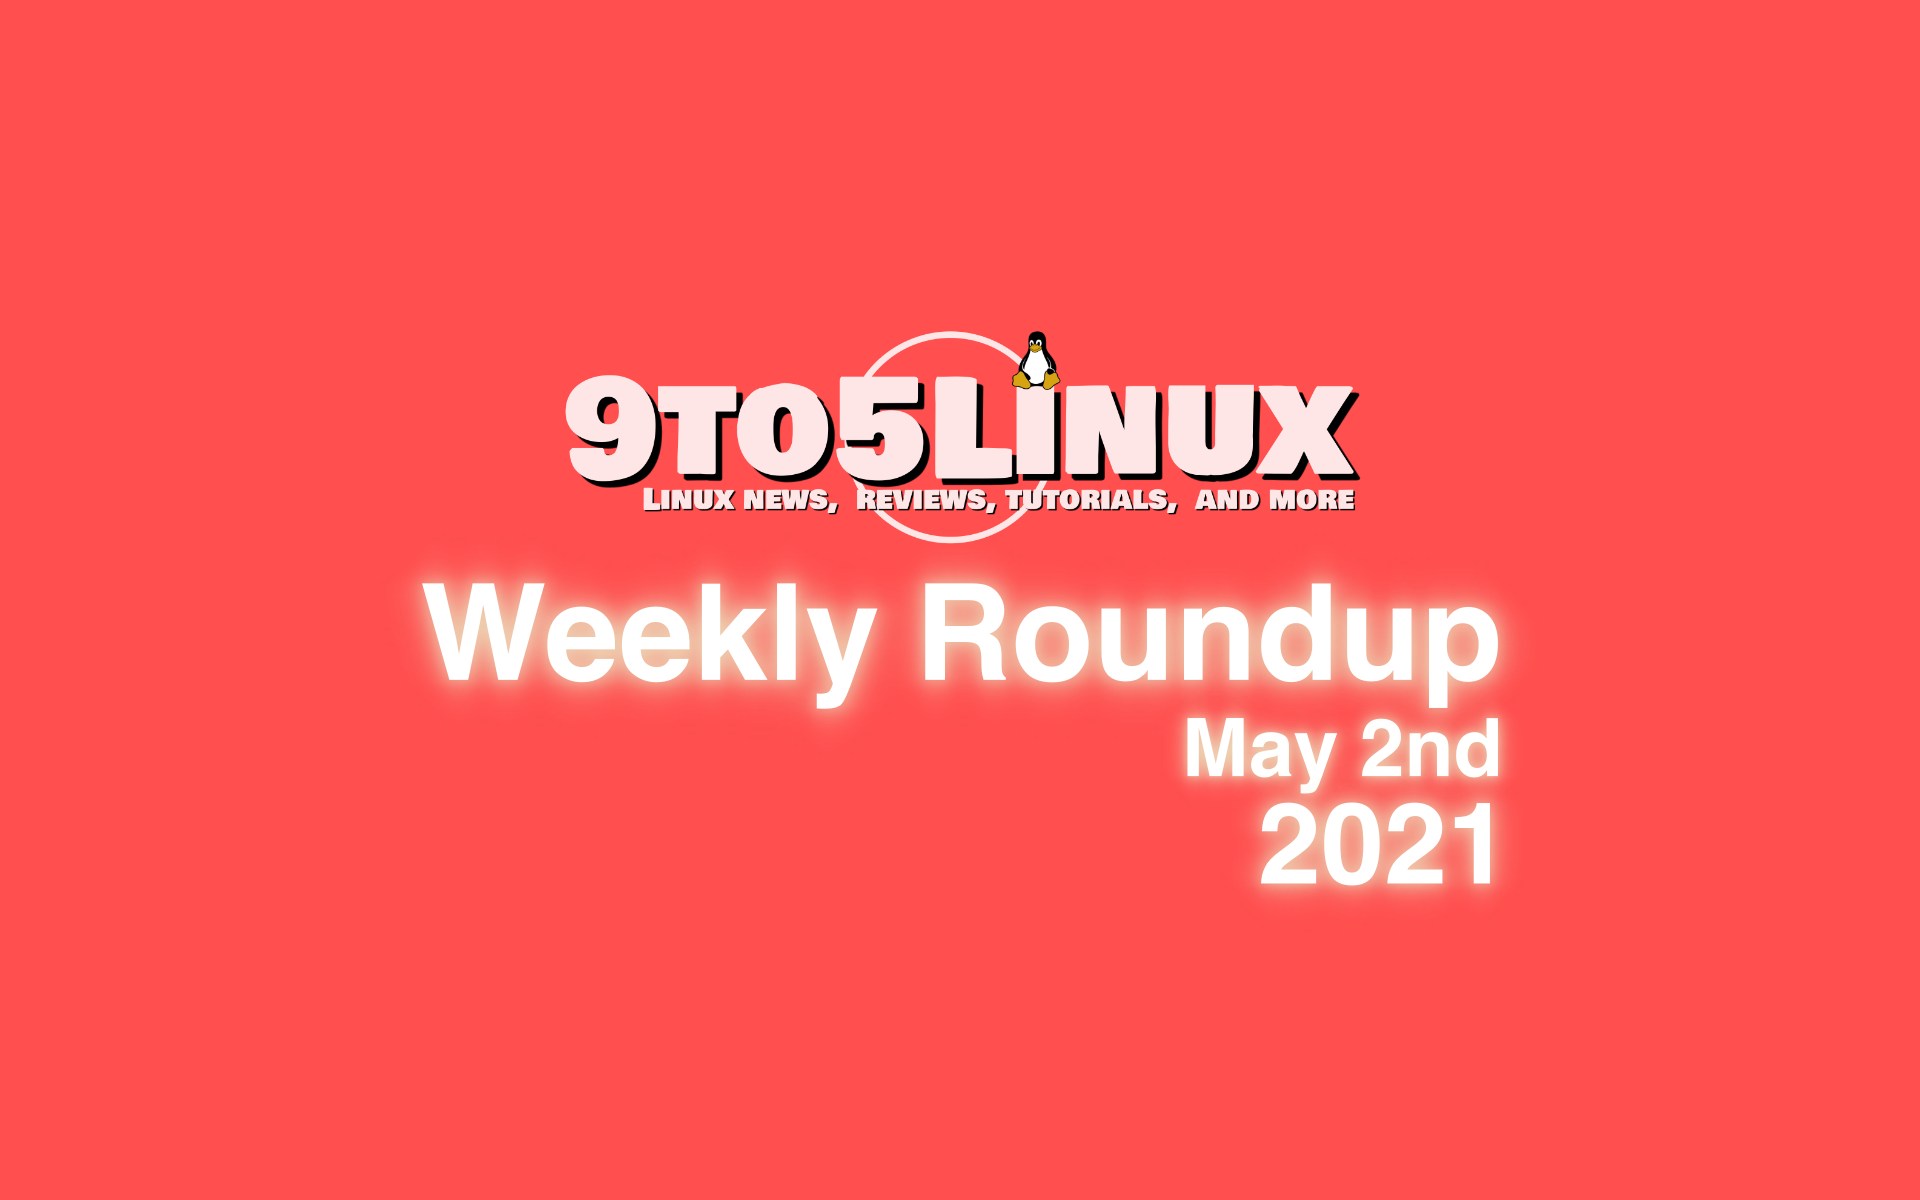 9to5Linux Weekly Roundup: May 2nd, 2021